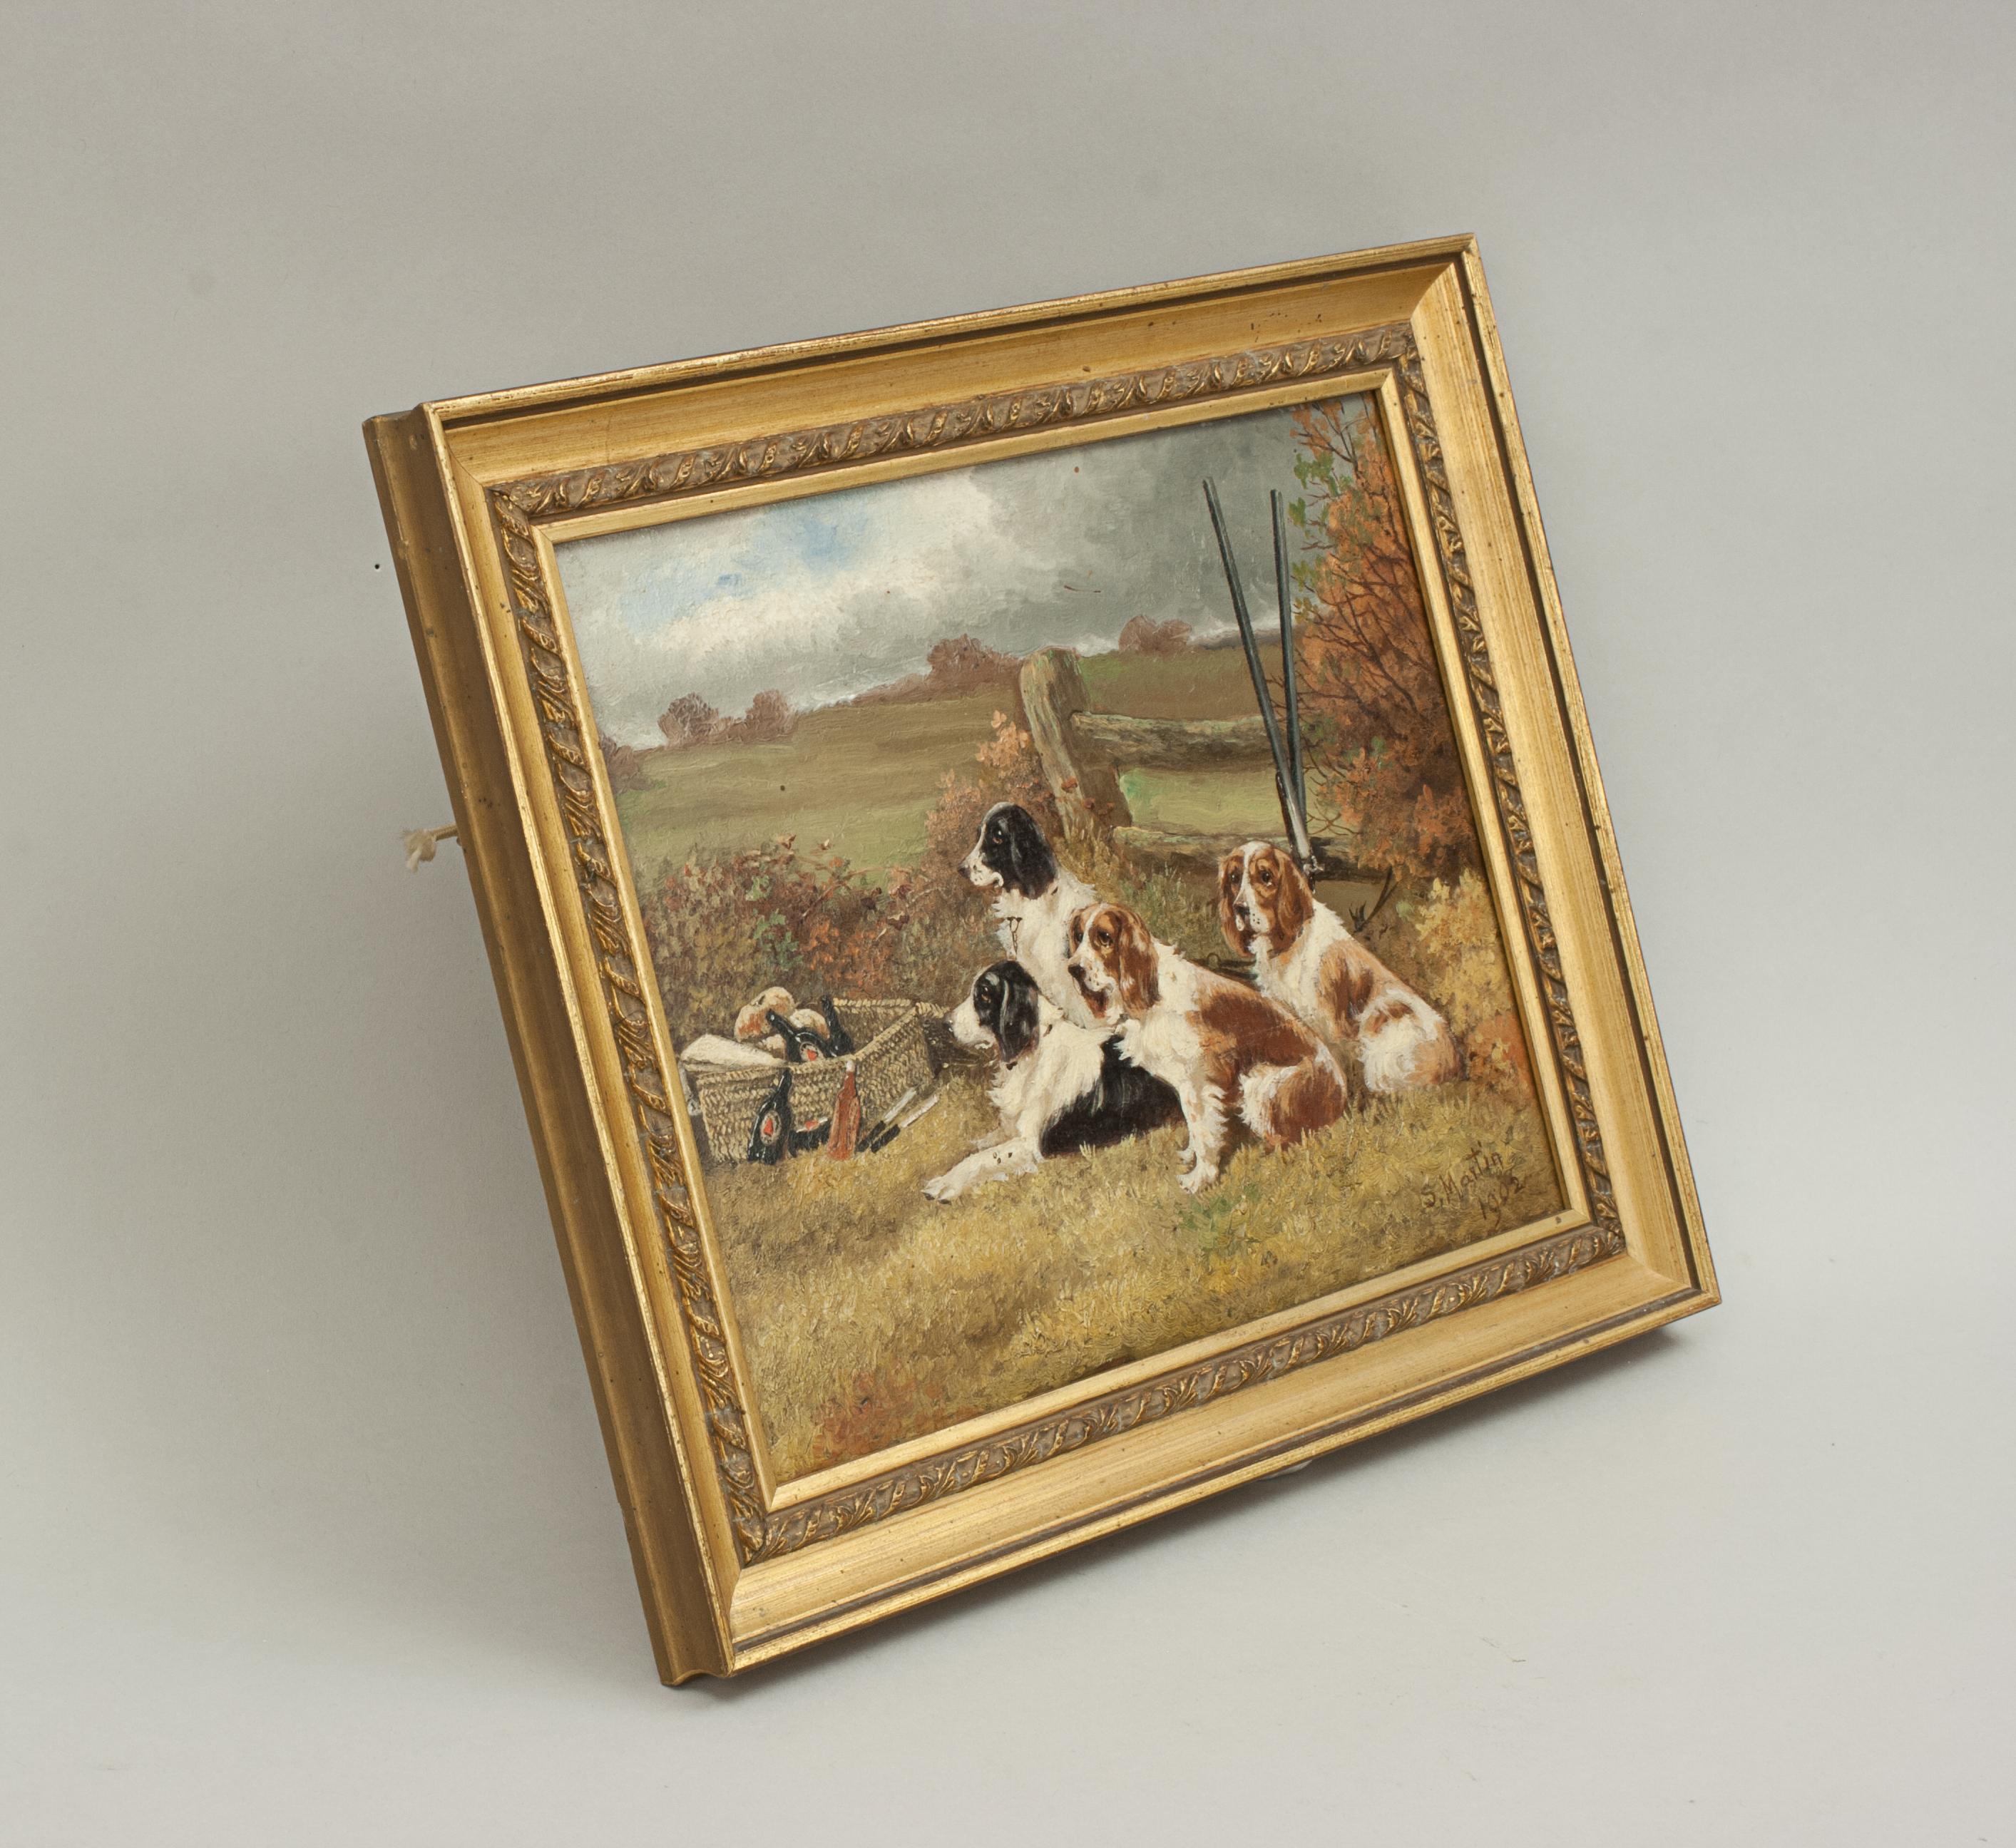 Sporting Art Pair of Oil Paintings of Hunting Spaniels, Mounted on Board